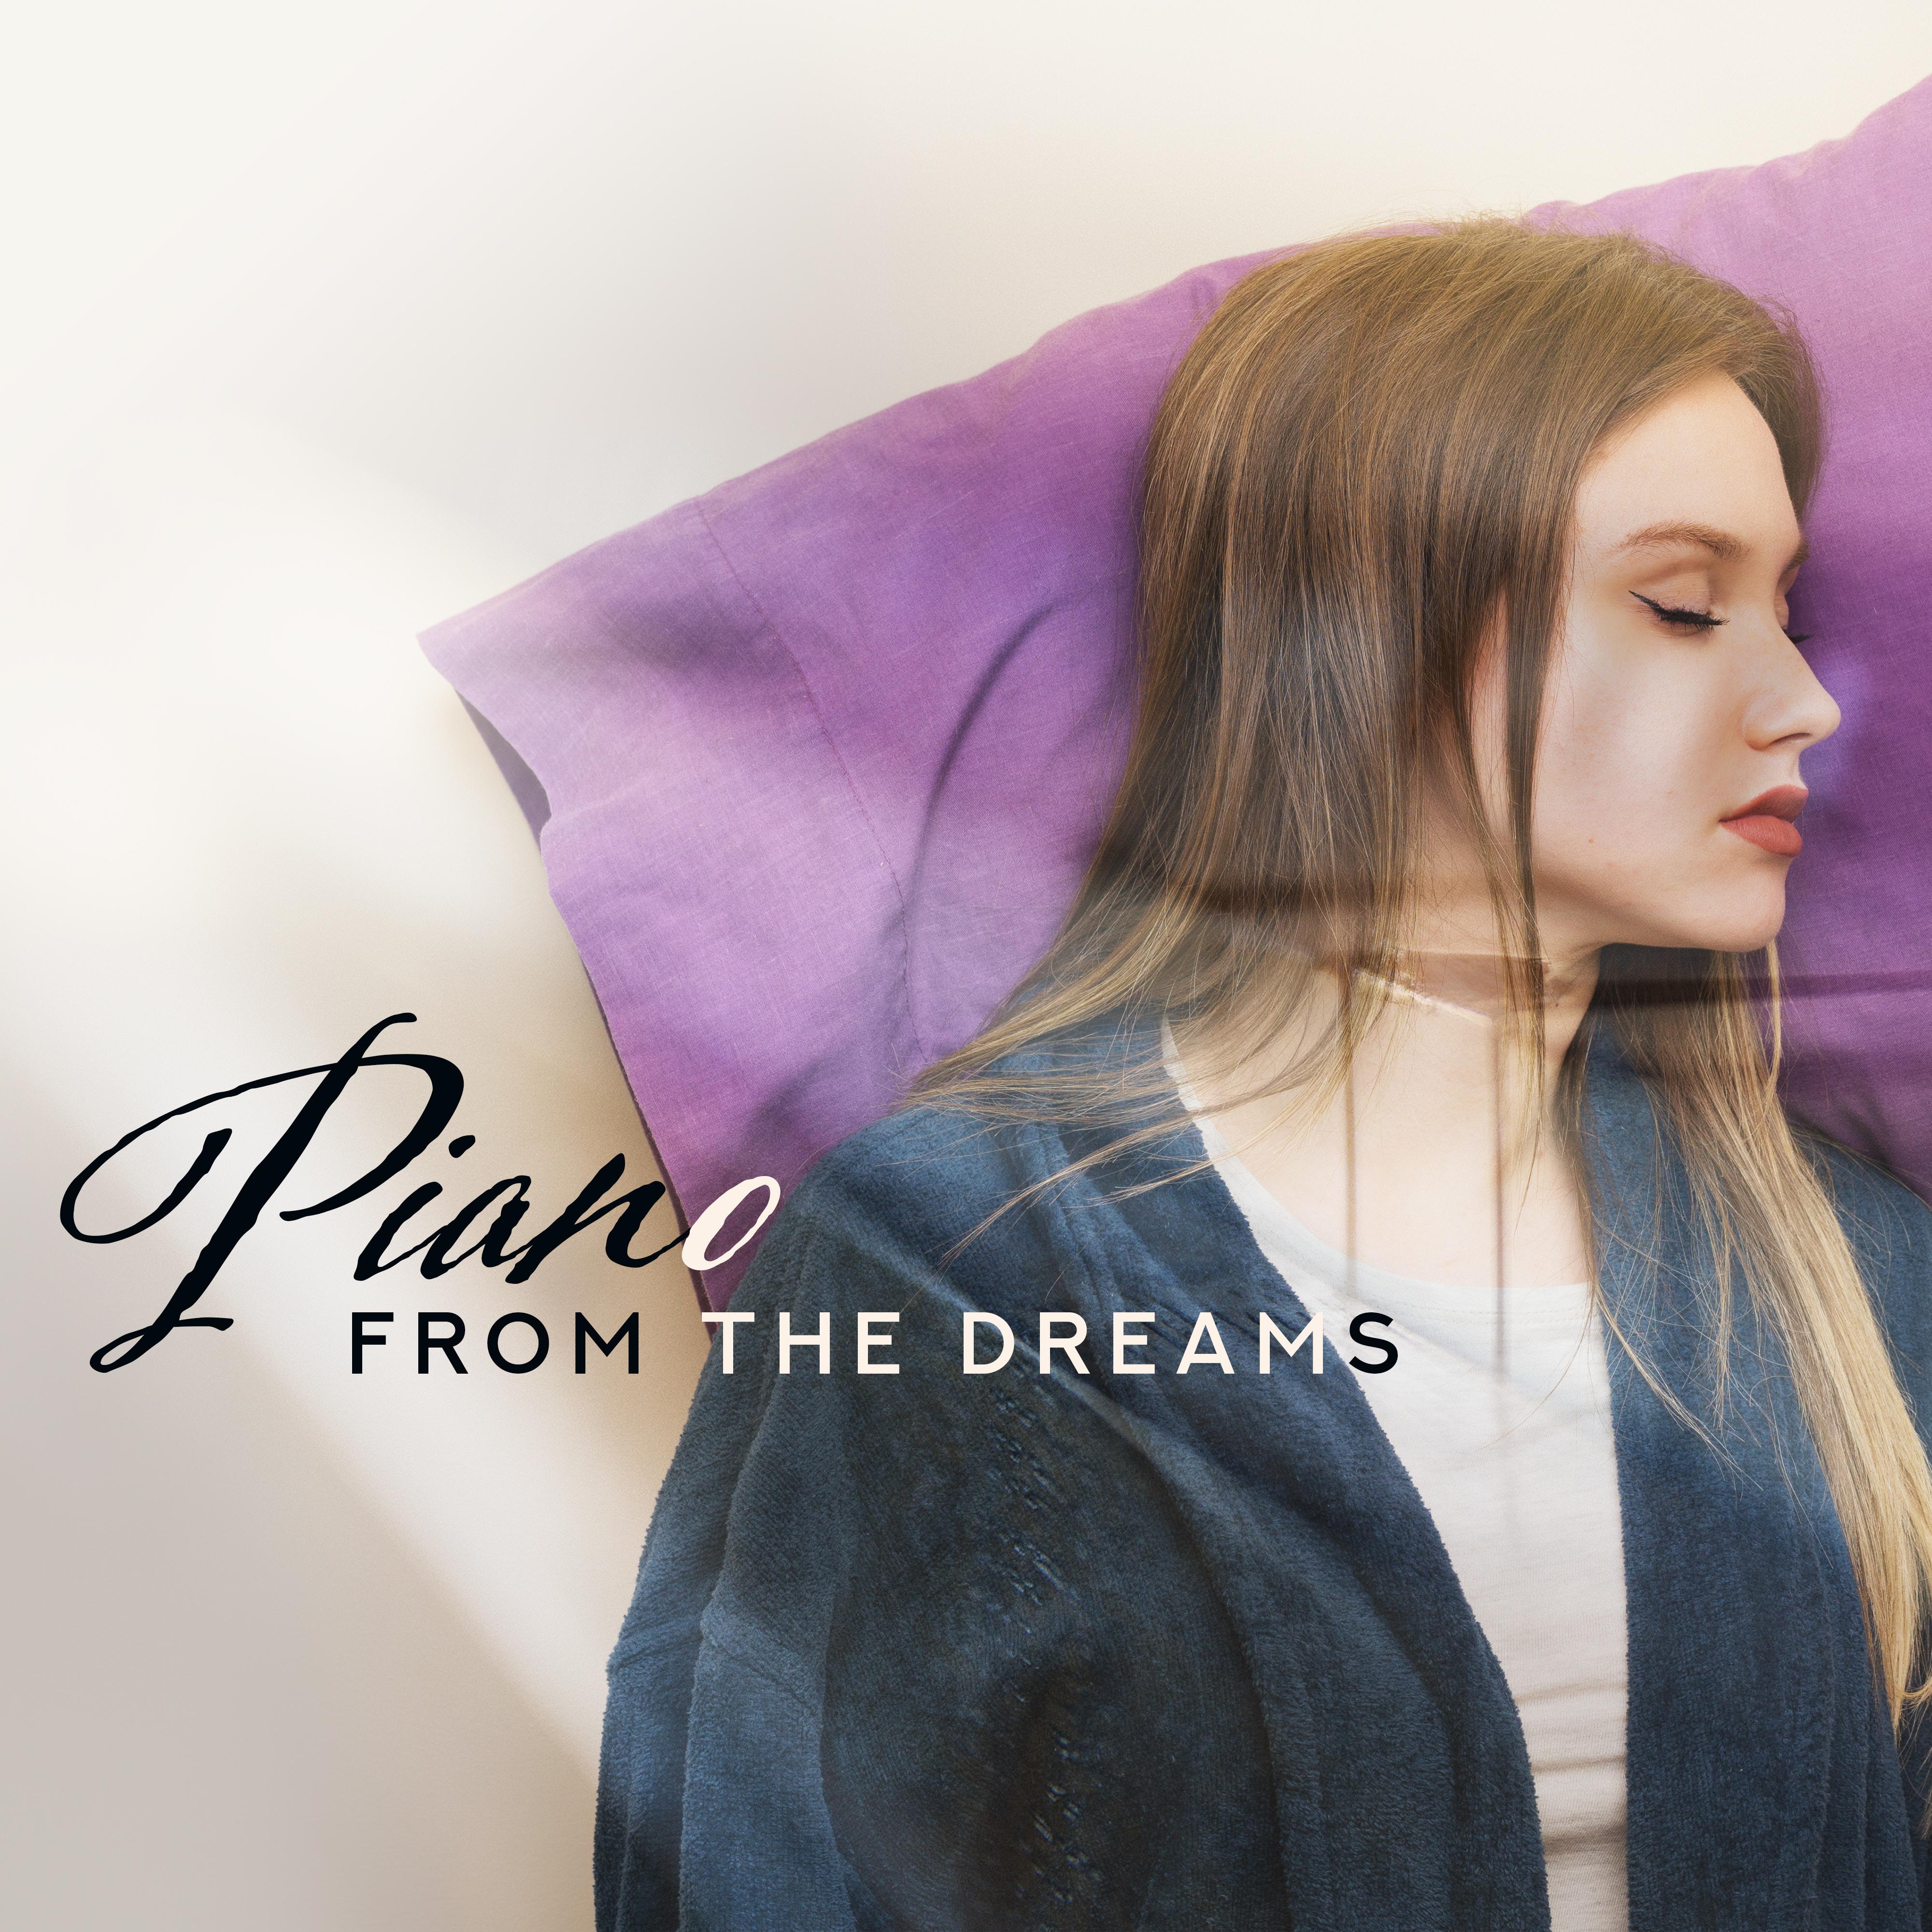 Piano from the Dreams: 2019 Sensual Piano Melodies for Perfect Night Dreaming, Sleep All Night Long, Rest & Relax, Calming Down